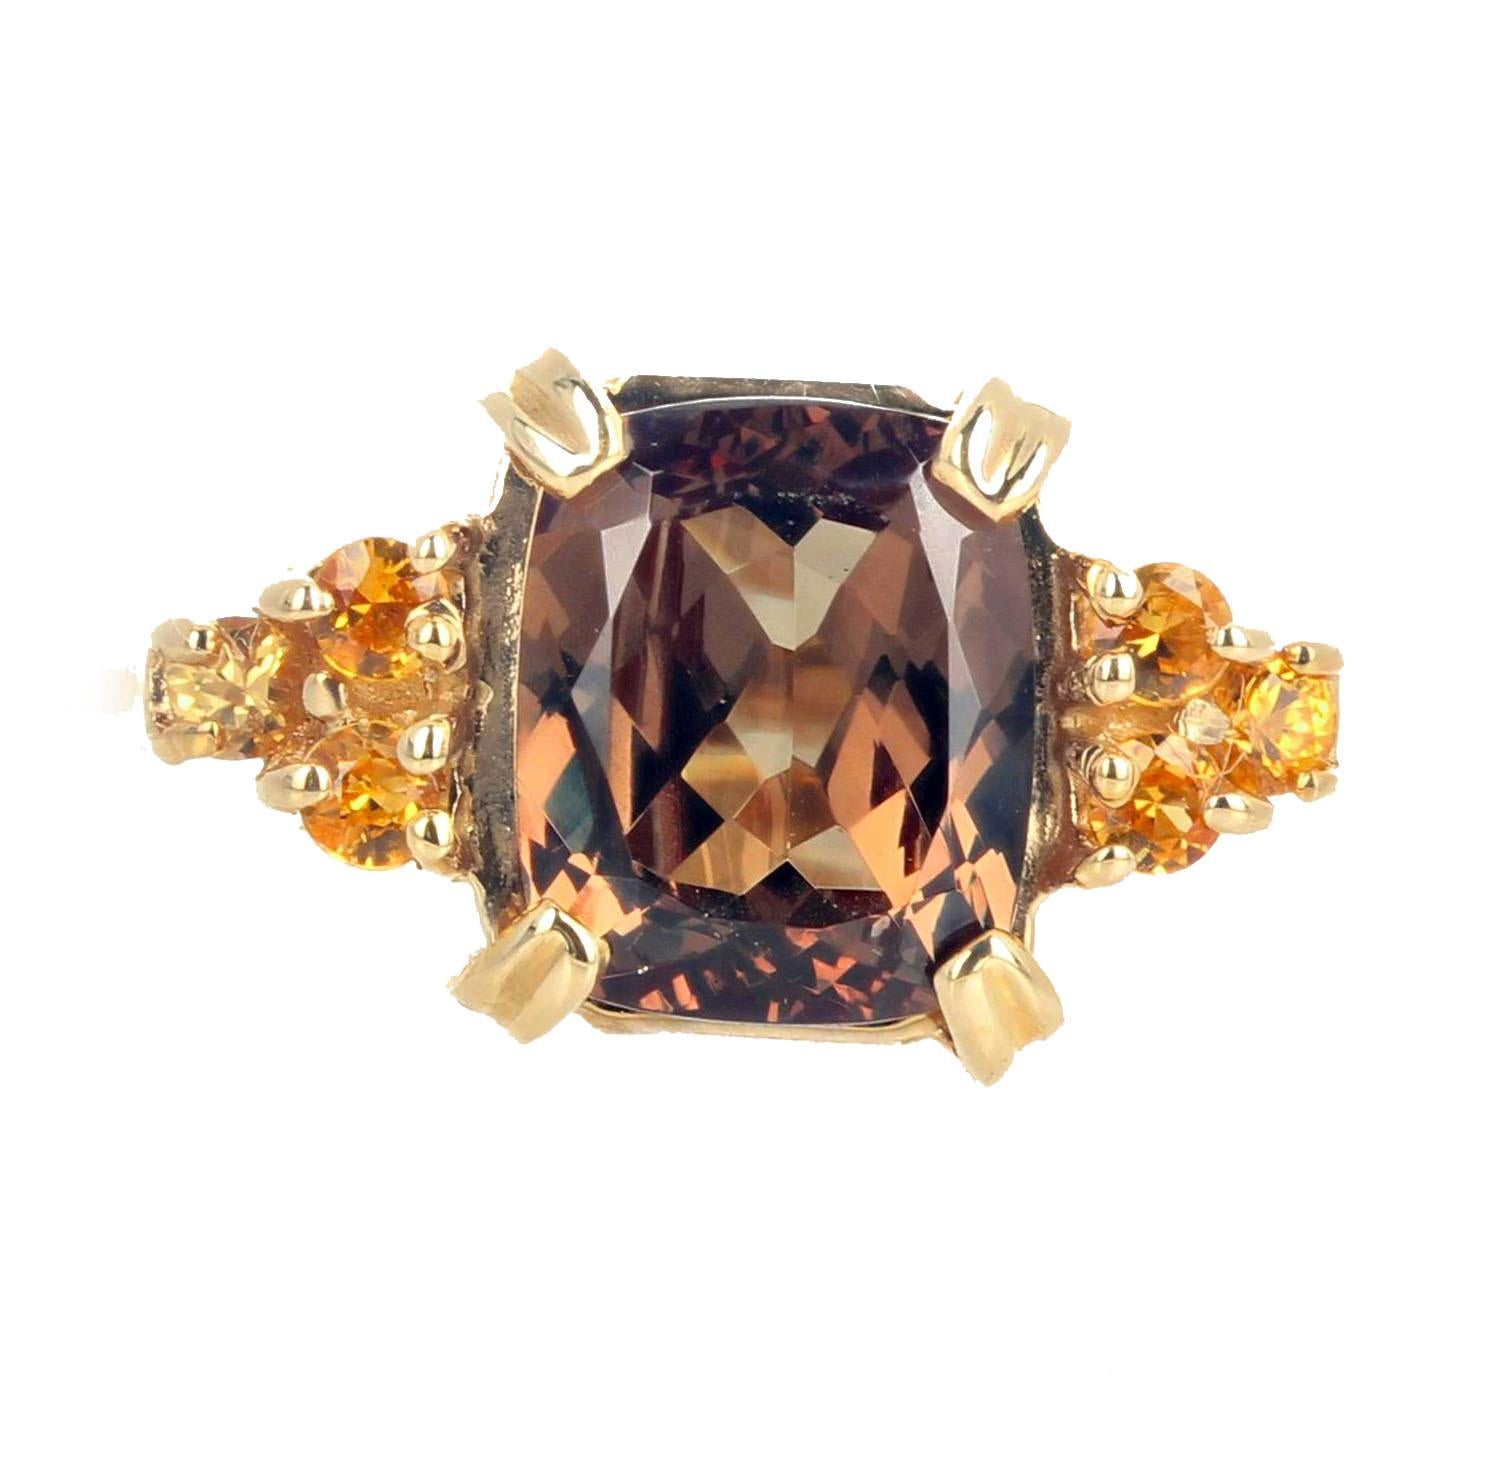 This very rare fiery unique natural color change 2.62 carat Garnet is flanked by 6 intense yellow natural 2.2 carats of Sri Lankan Sapphires.  This classic 14Kt yellow gold ring size 7 (sizable) is the perfect gift to honor someone on their special